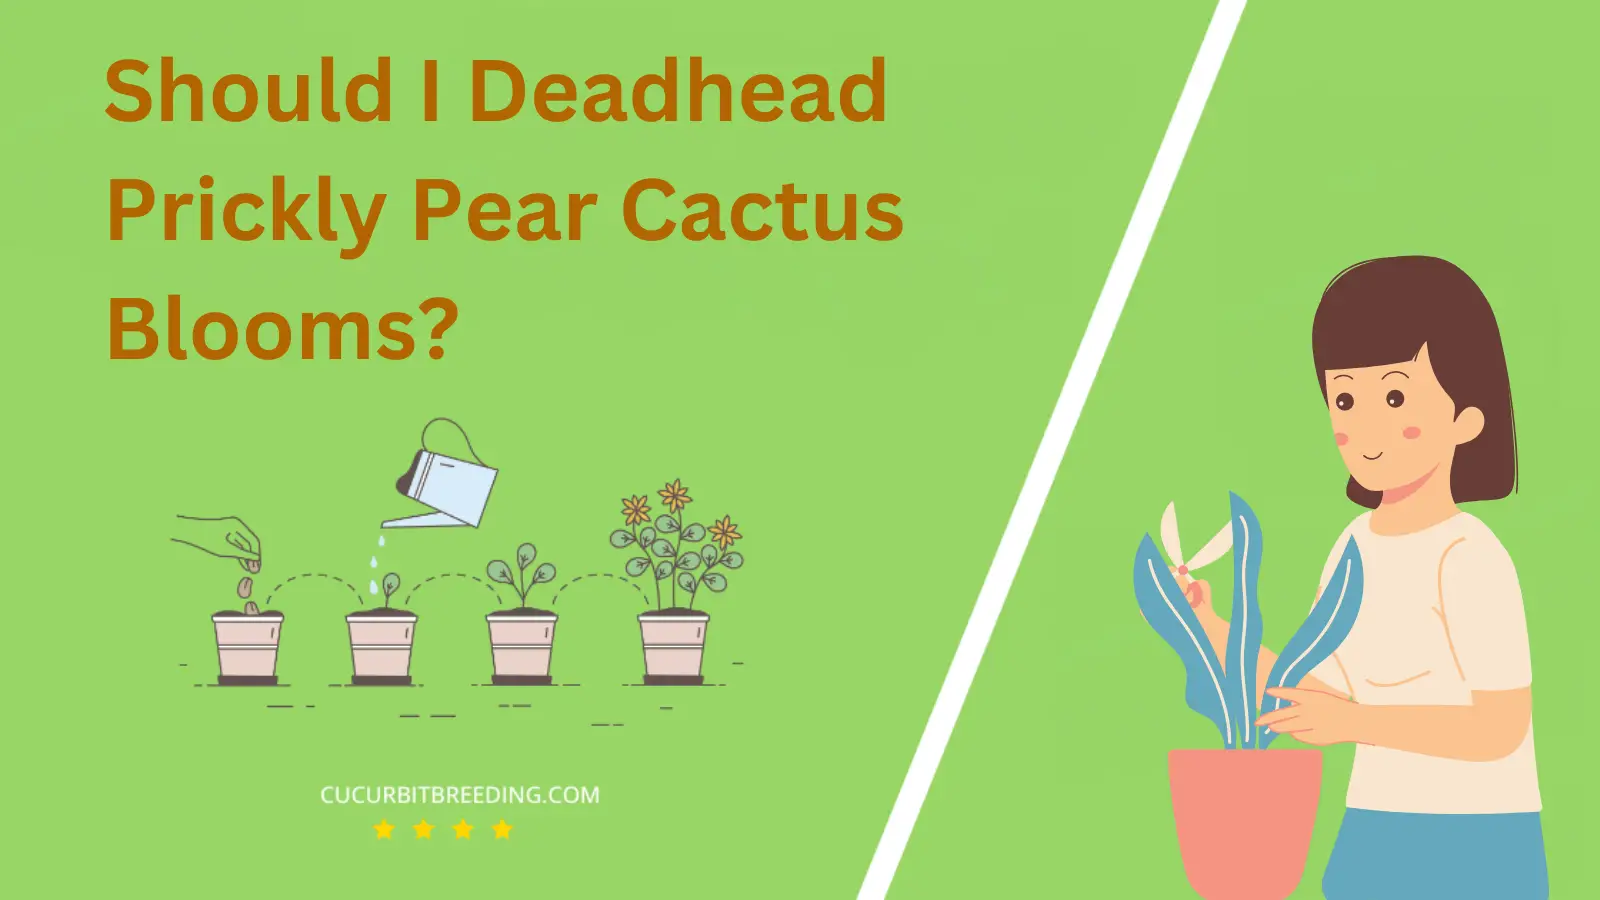 Should I Deadhead Prickly Pear Cactus Blooms?